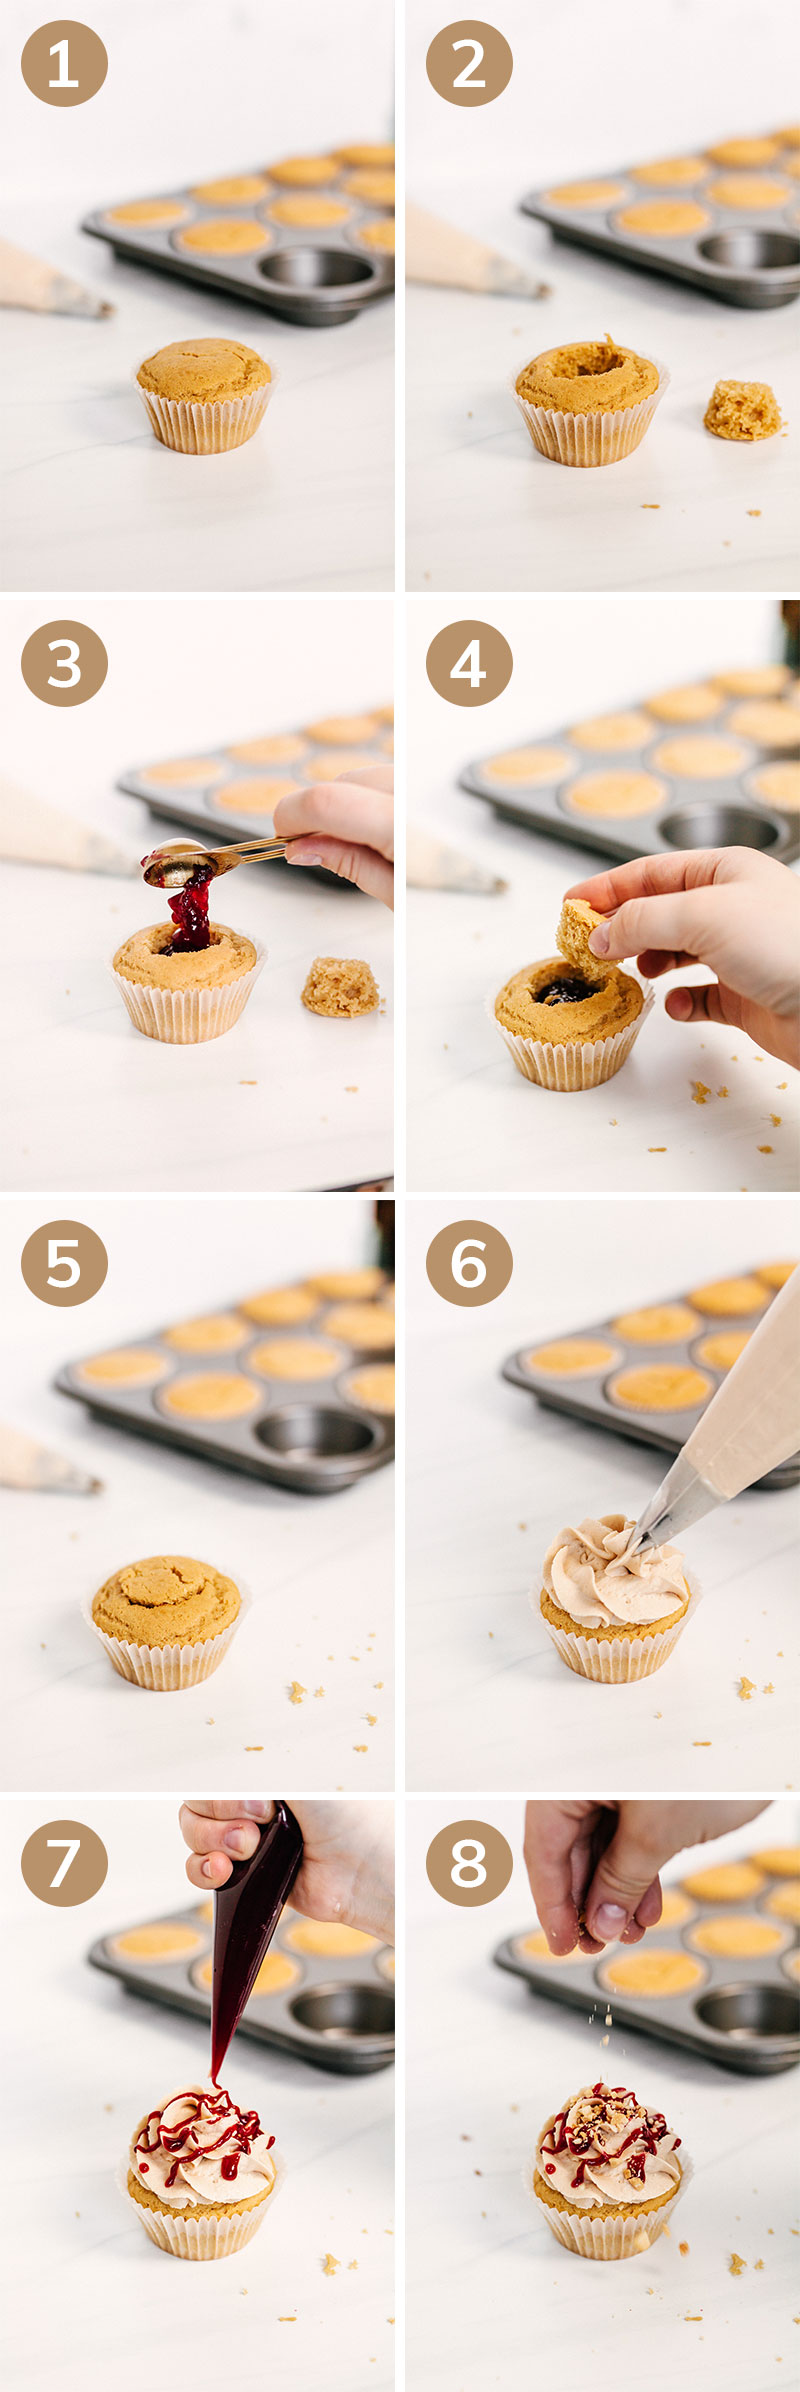 peanut butter and jelly cupcakes assembly